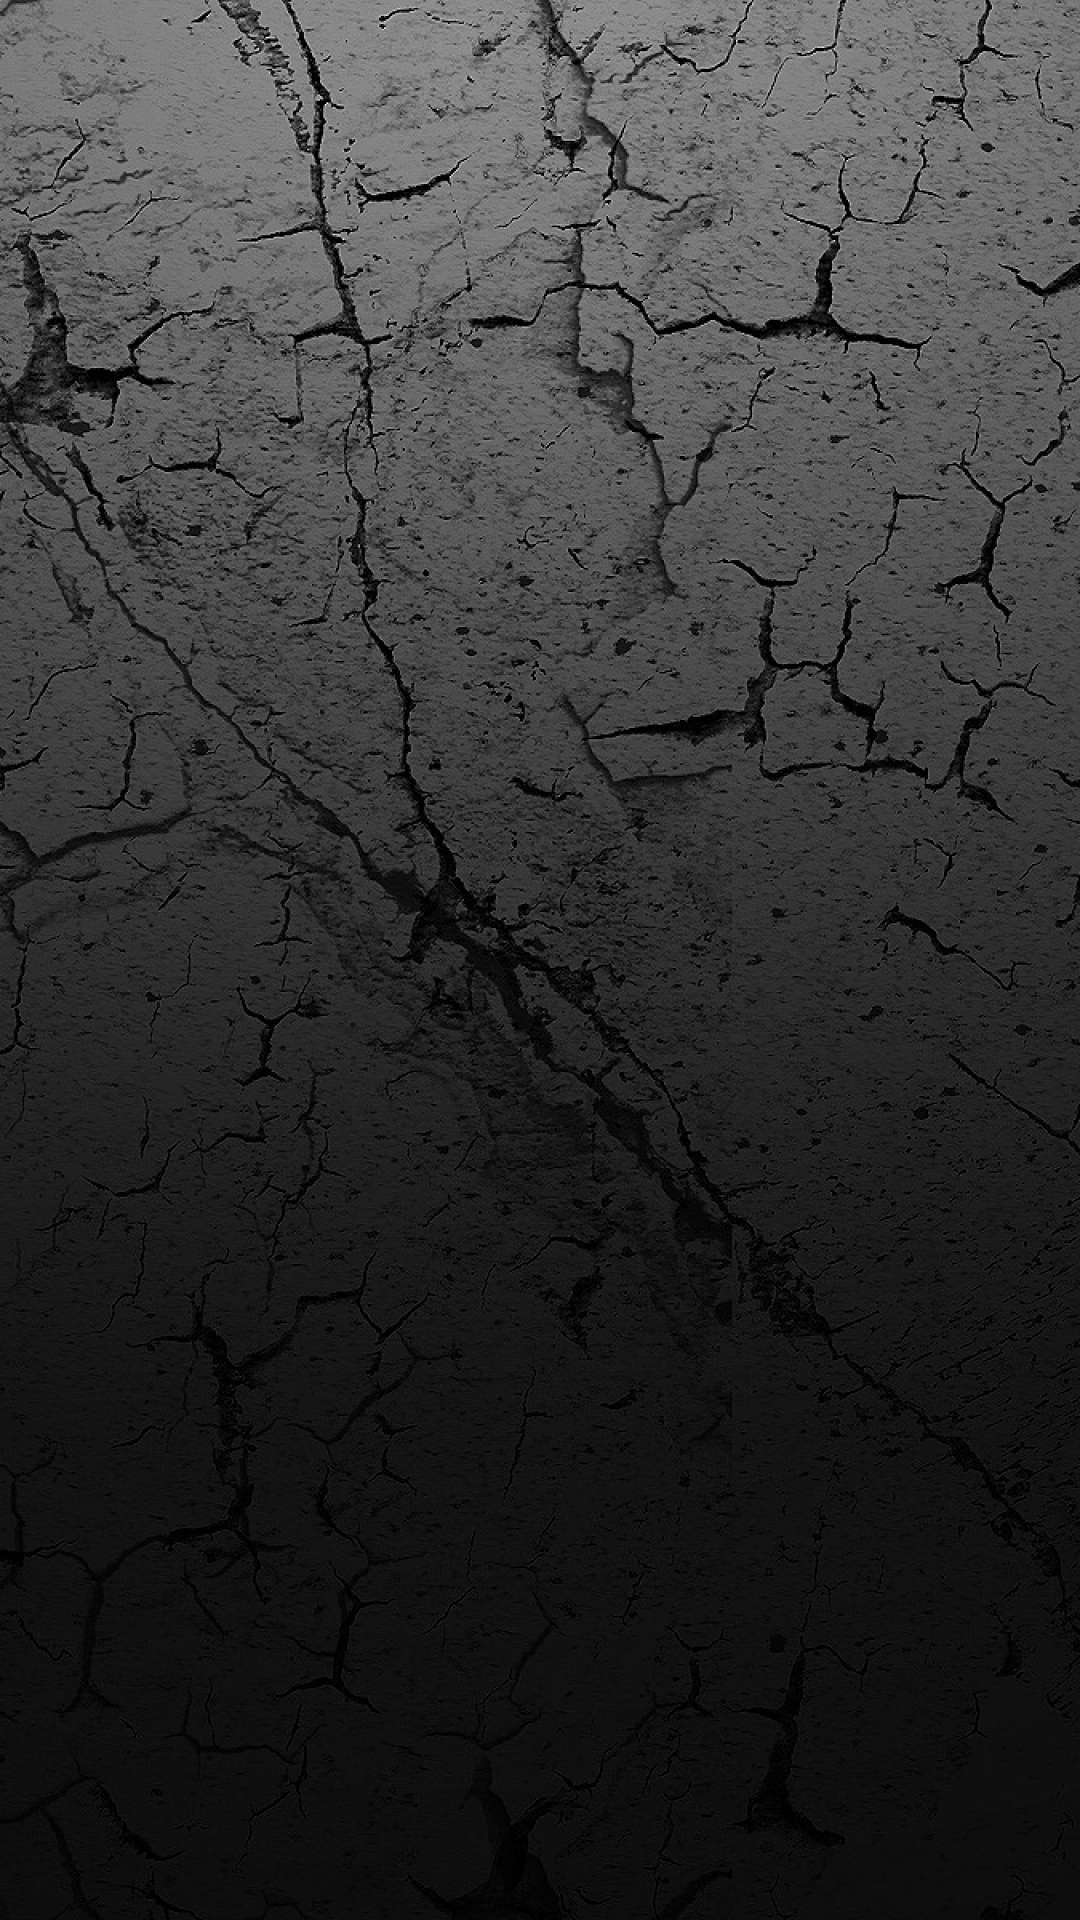 Cracked Screen Background Hd For Android - 720 X 1280 Pixels Hd Dark -  1080x1920 Wallpaper 